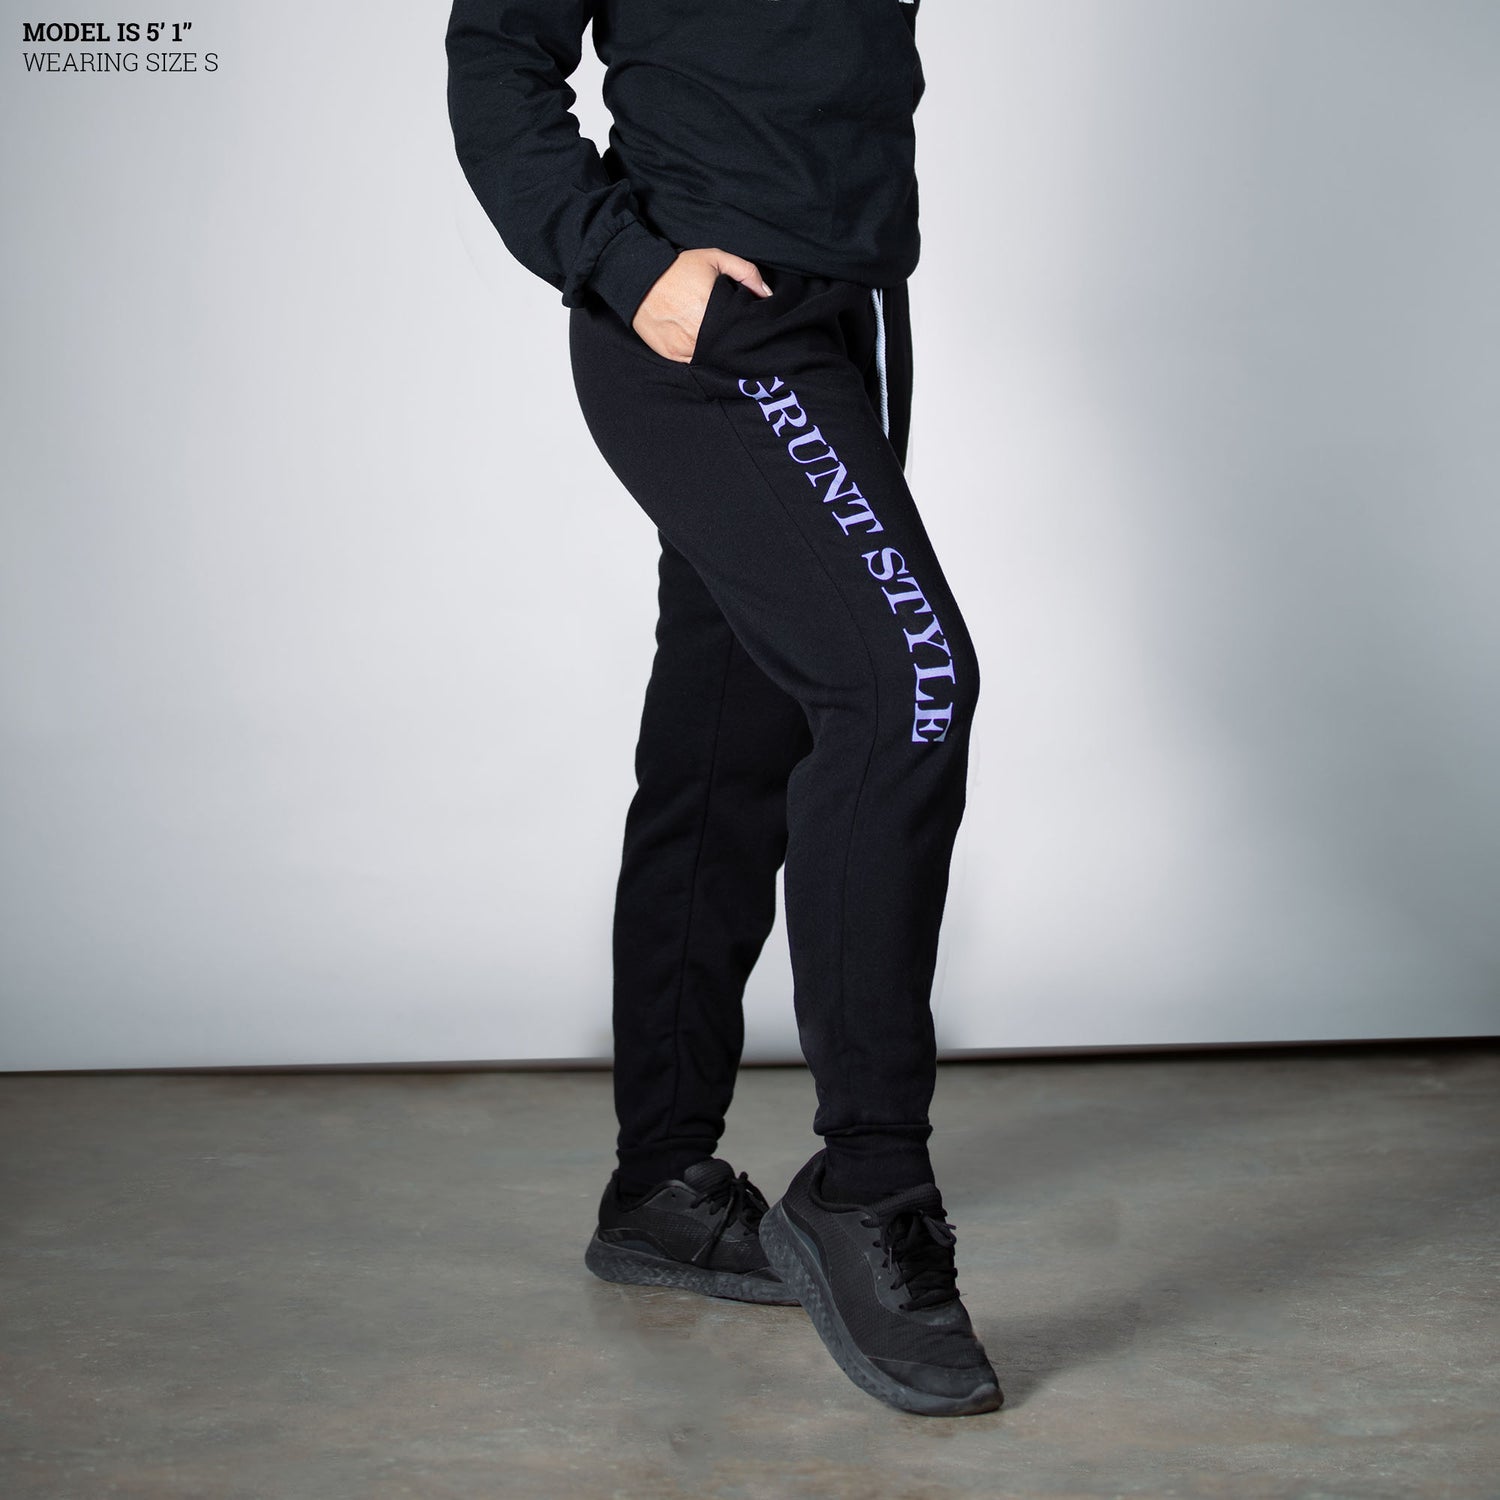 Comfortable Joggers for Women 